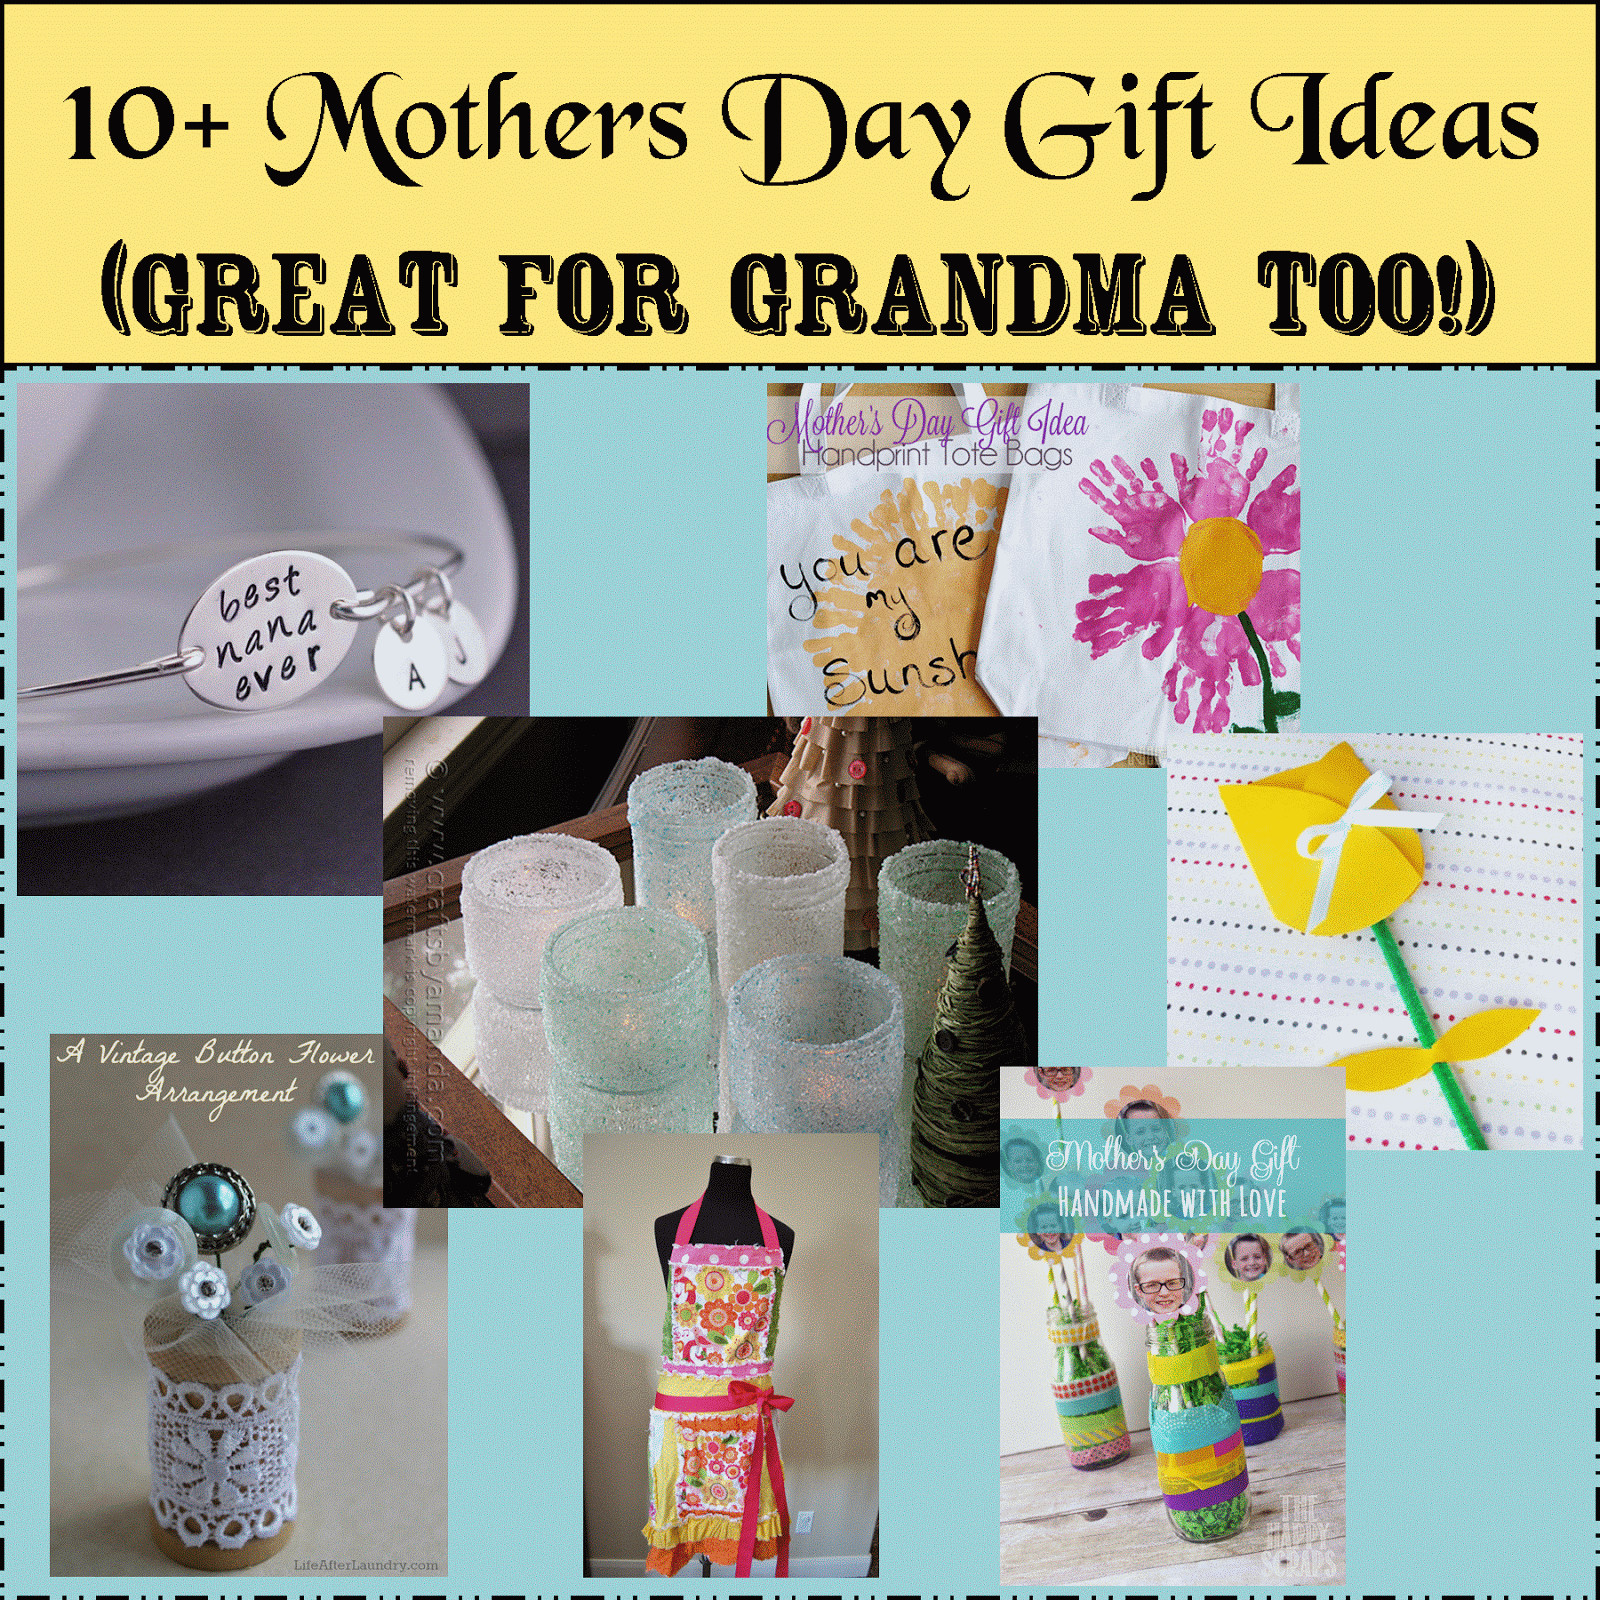 Great Grandmother Gift Ideas
 Mother Day Gifts Roundup Perfect for Grandma Too